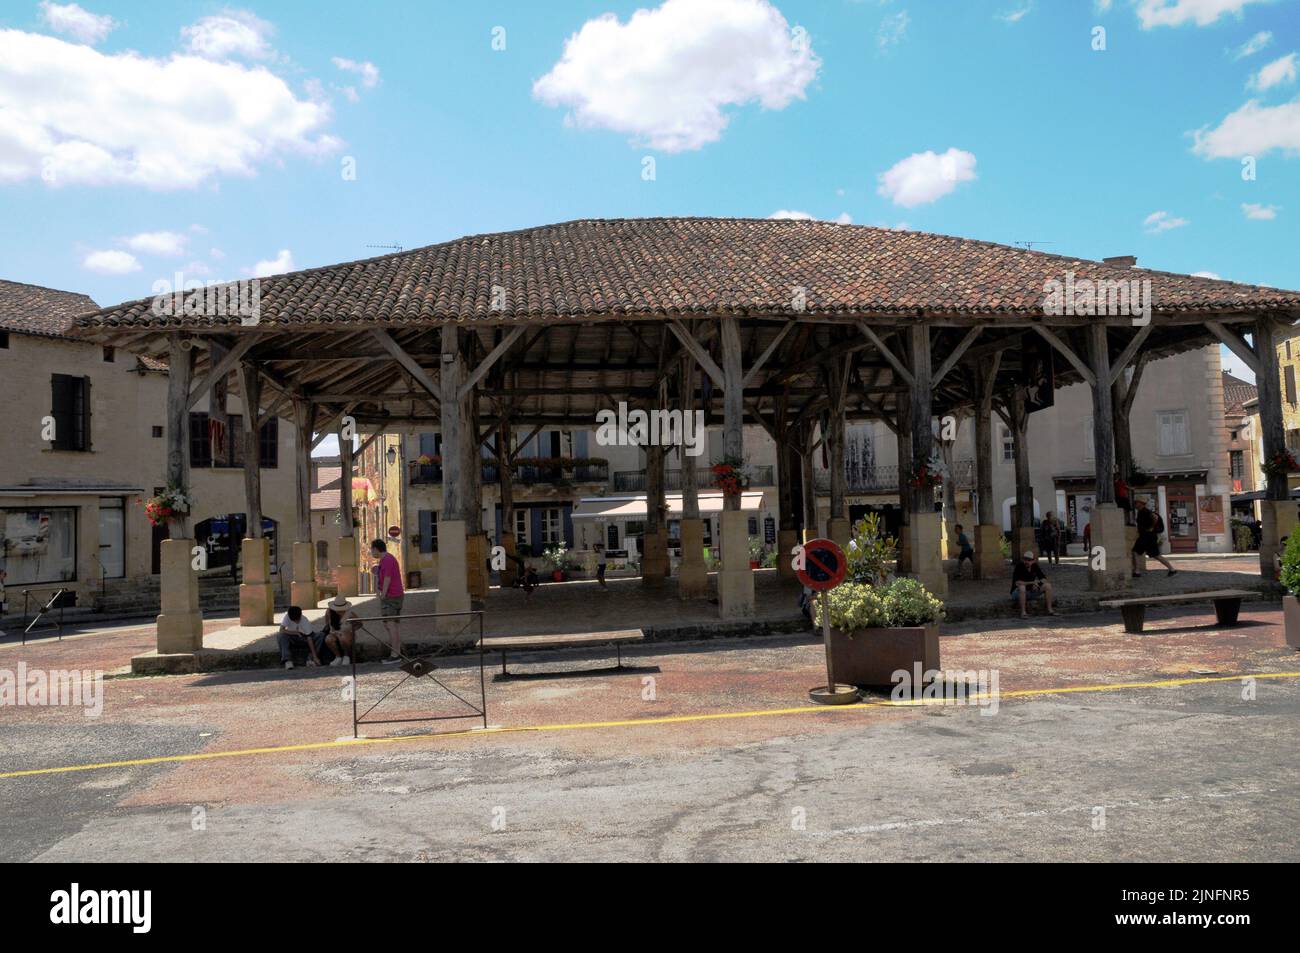 The market square in the Perigord Noir village of Belvès. Markets are held every Saturday. Unusually there are old dwellings beneath the market. Stock Photo